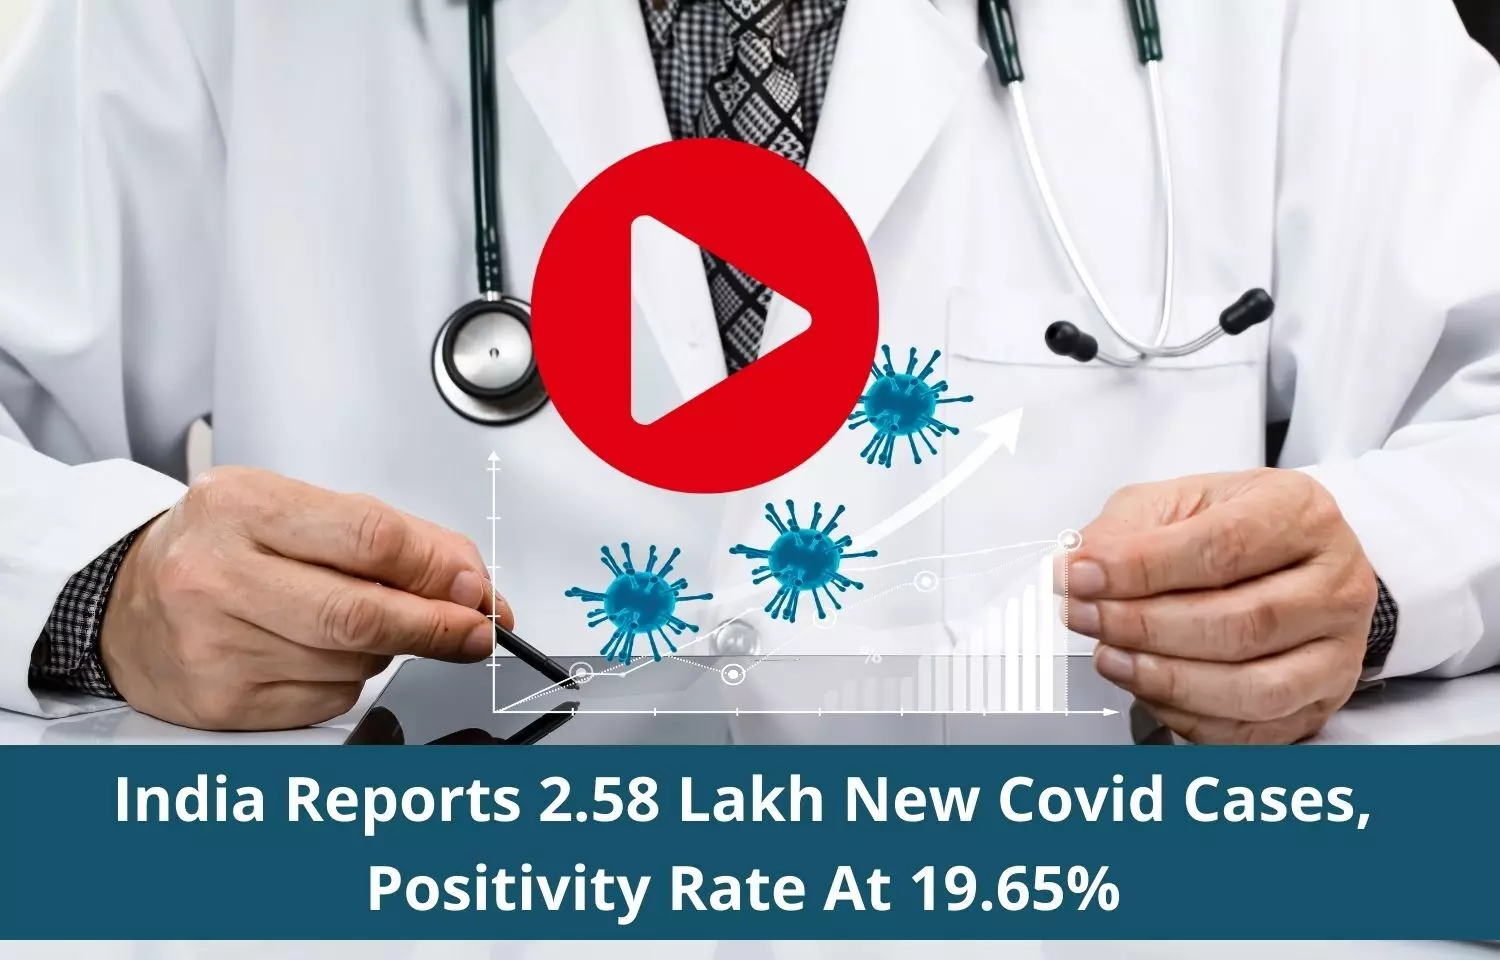 India reports 2.58 lakh new COVID cases, positivity rate at 19.65 percent